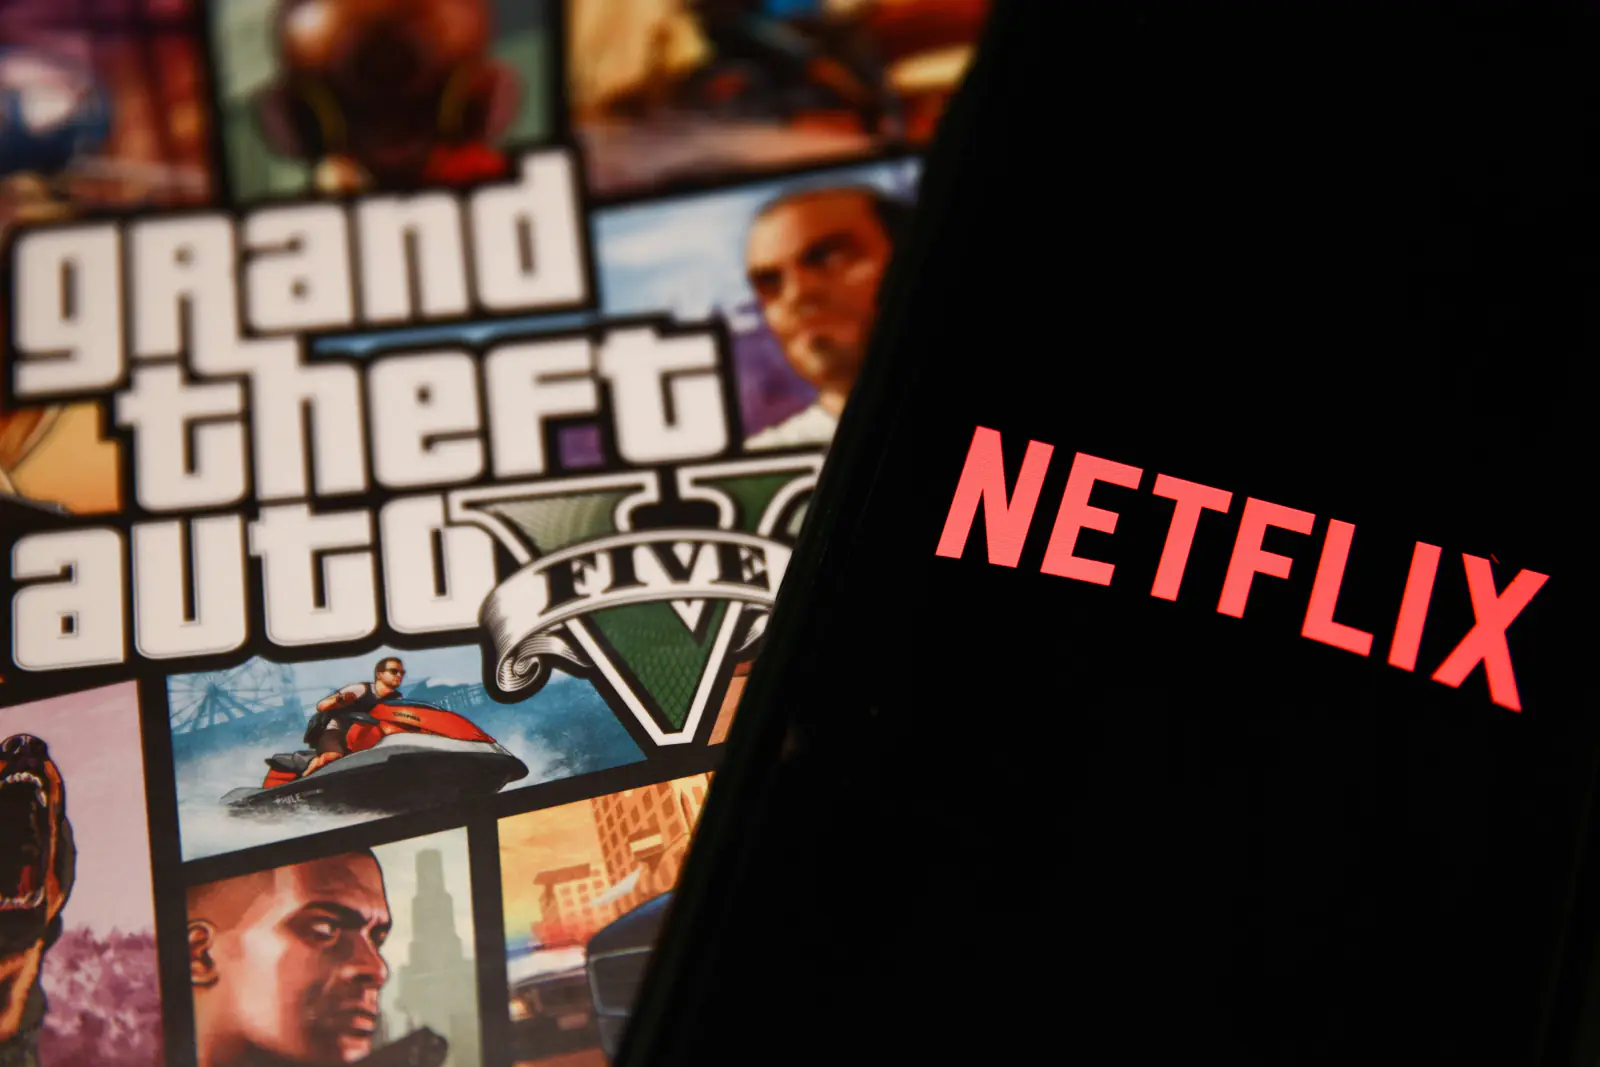 Netflix users will be able to play GTA Vice City Game for free on their smartphones, know the method here